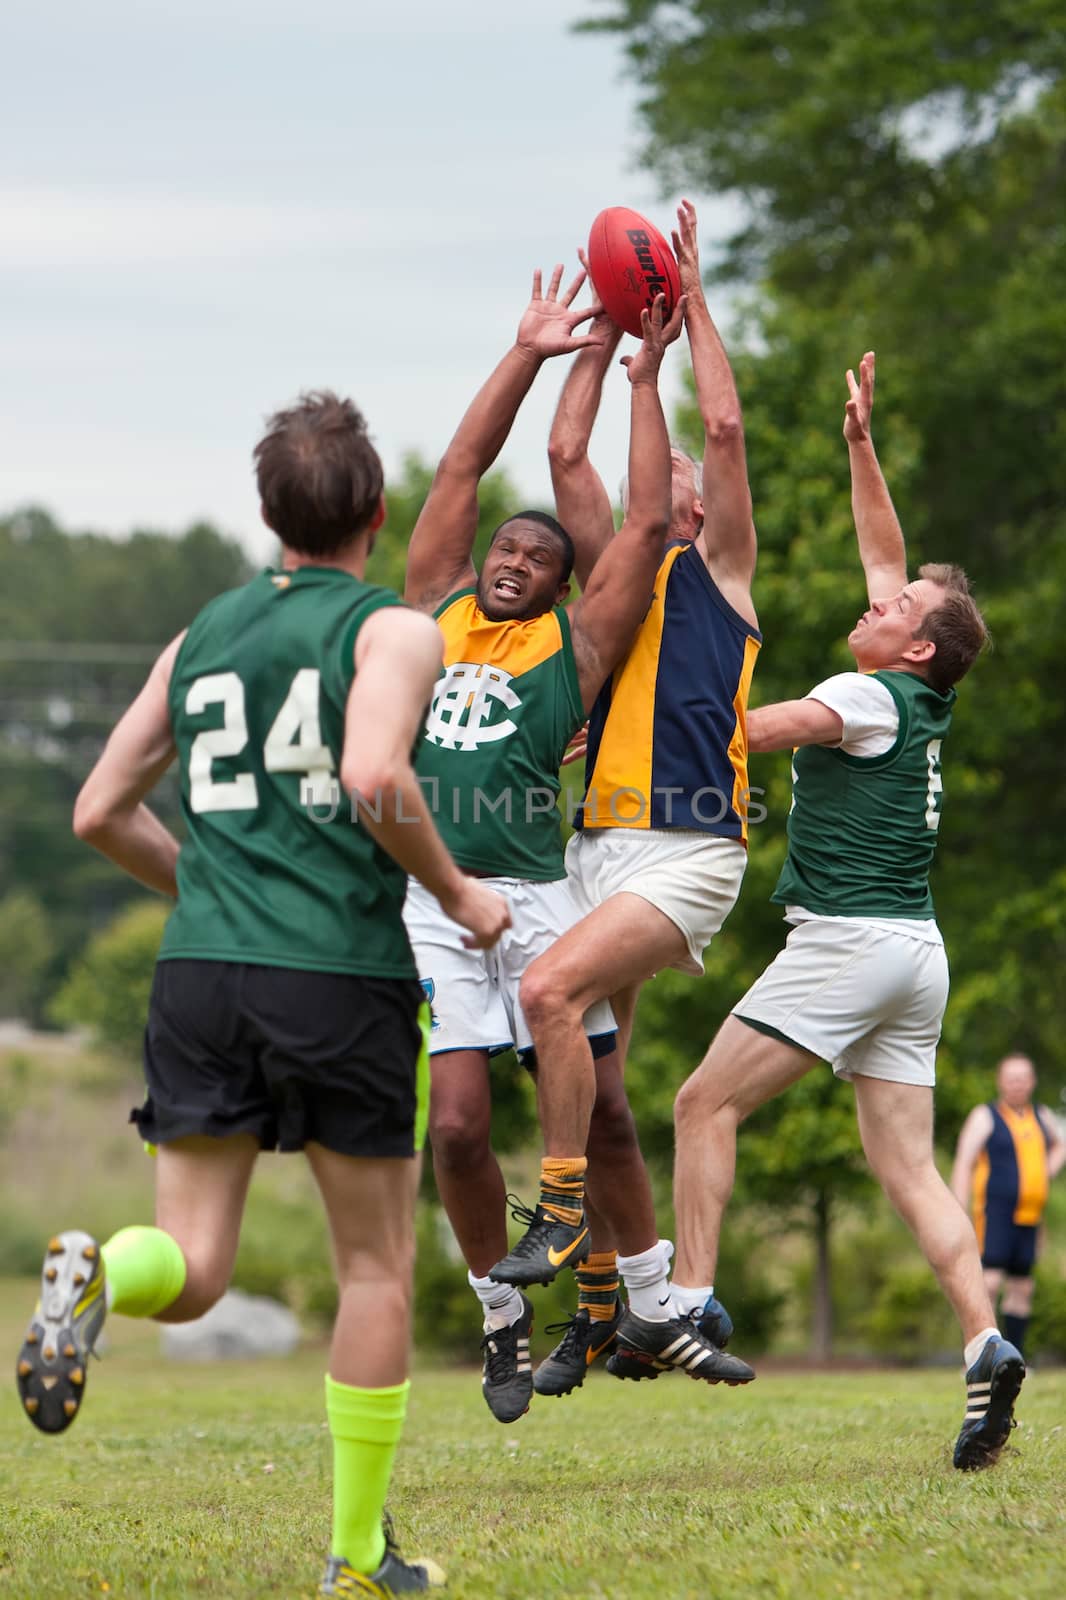 Players Battle For Ball In Australian Rules Football Game by BluIz60